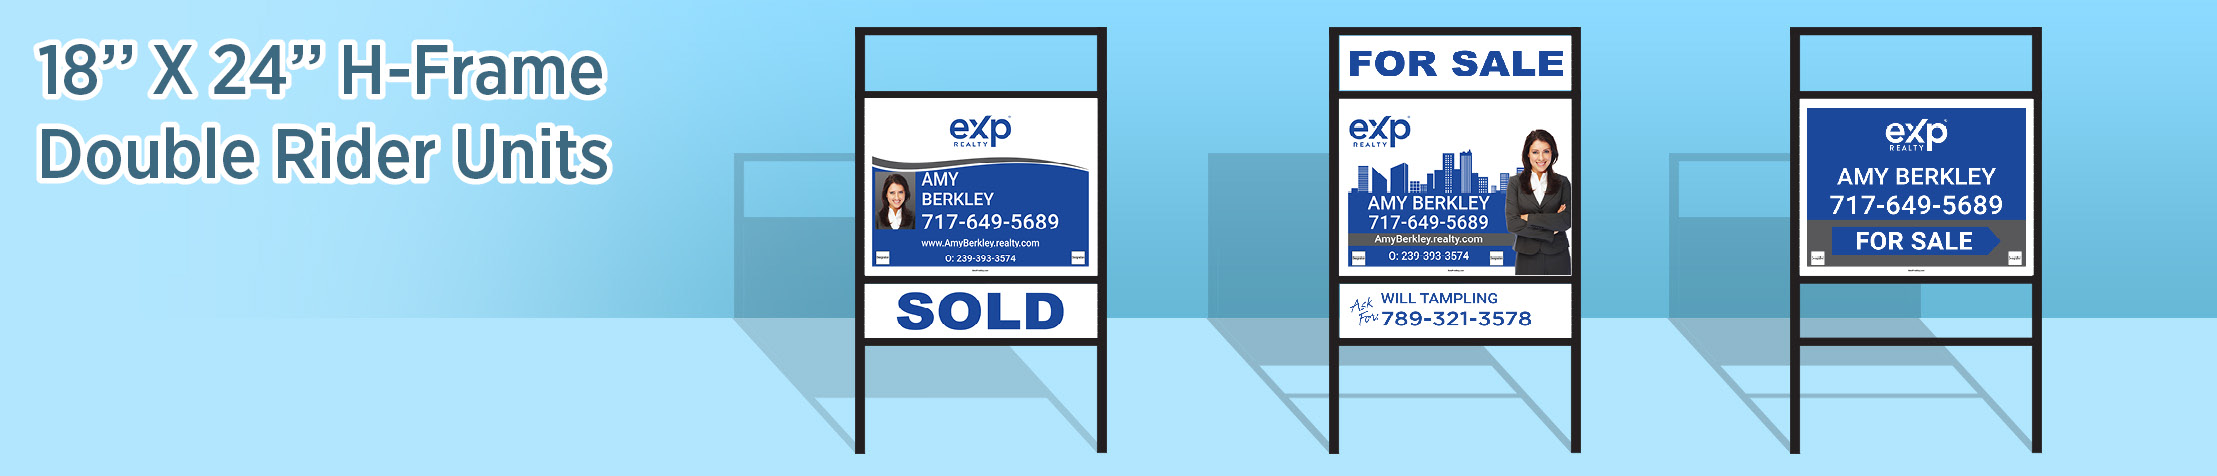 eXp Realty Real Estate 18